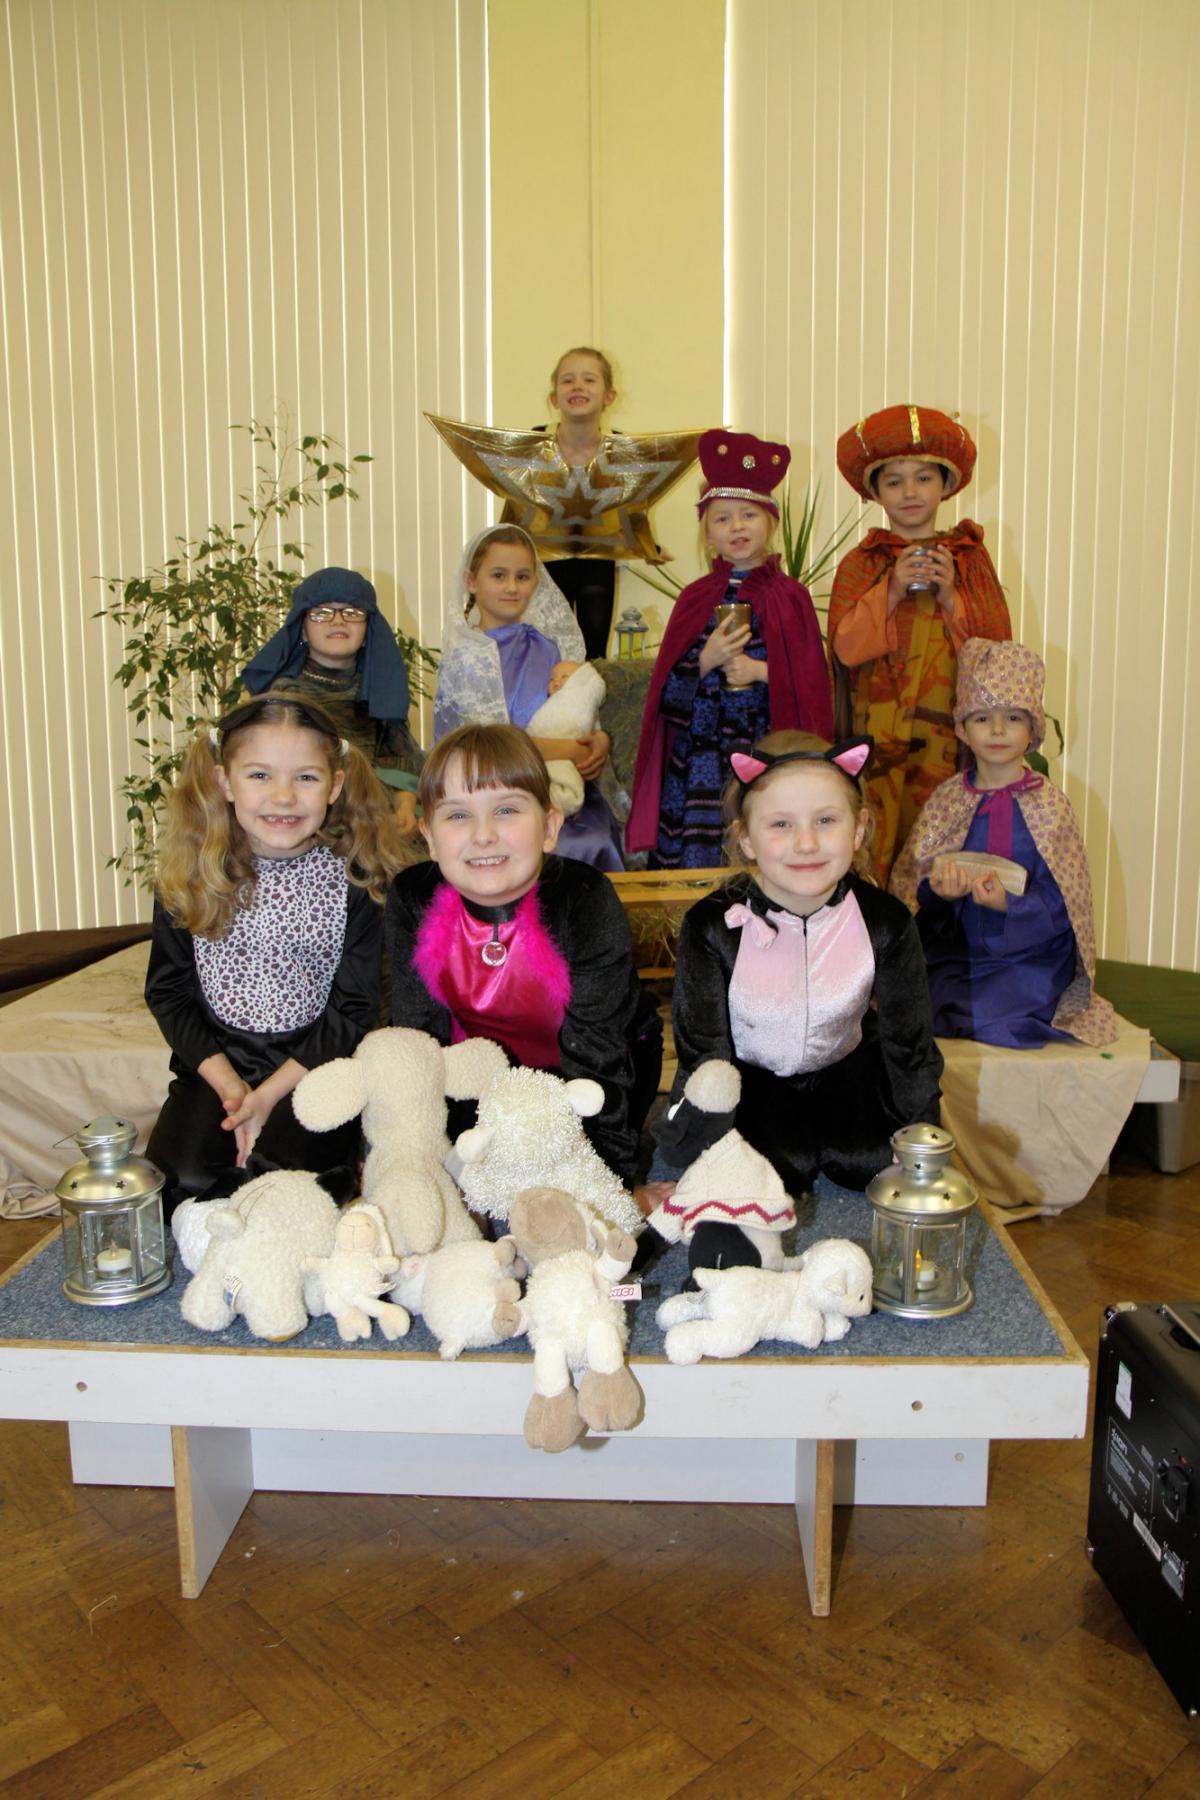 Ludlow Infants School pupils in year 2 performed The Landlord’s Cat. Some of the cast of the play.